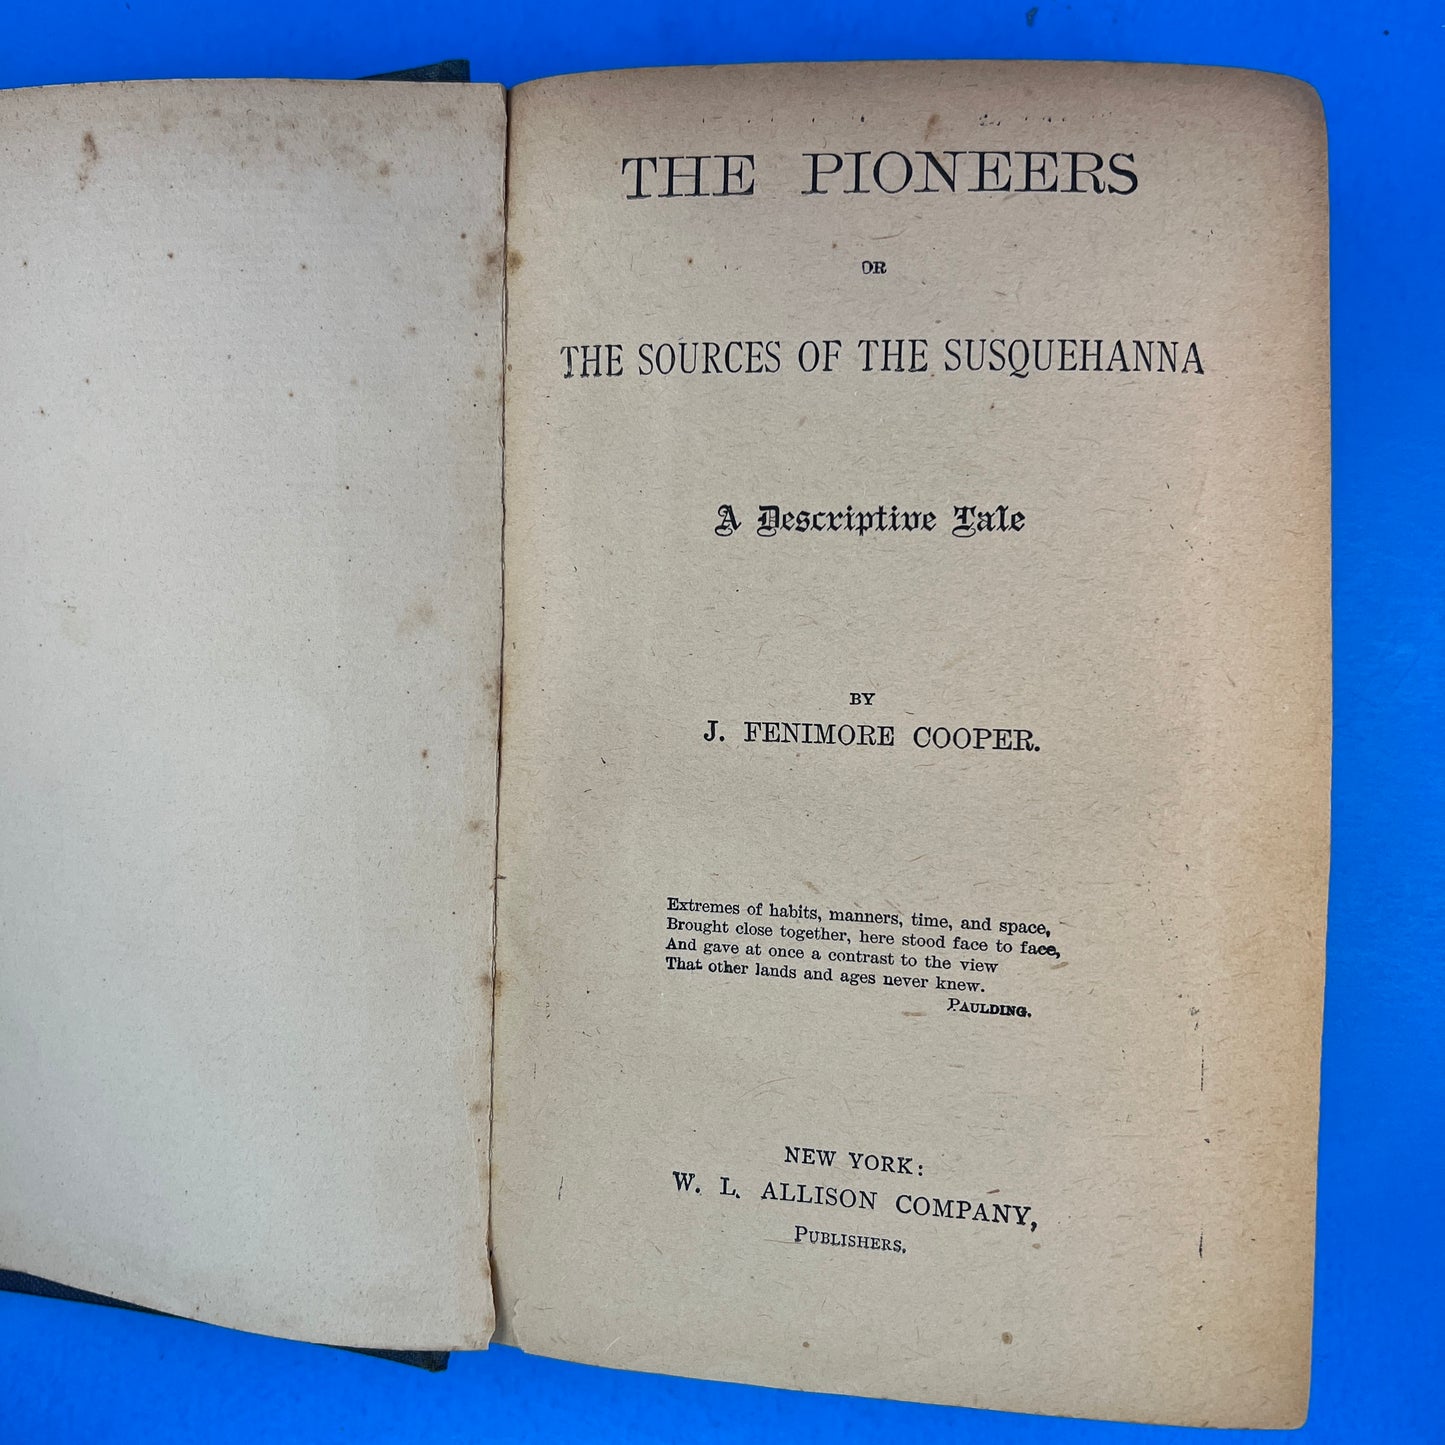 The Pioneers, or The Sources of the Susquehanna: A Descriptive Tale